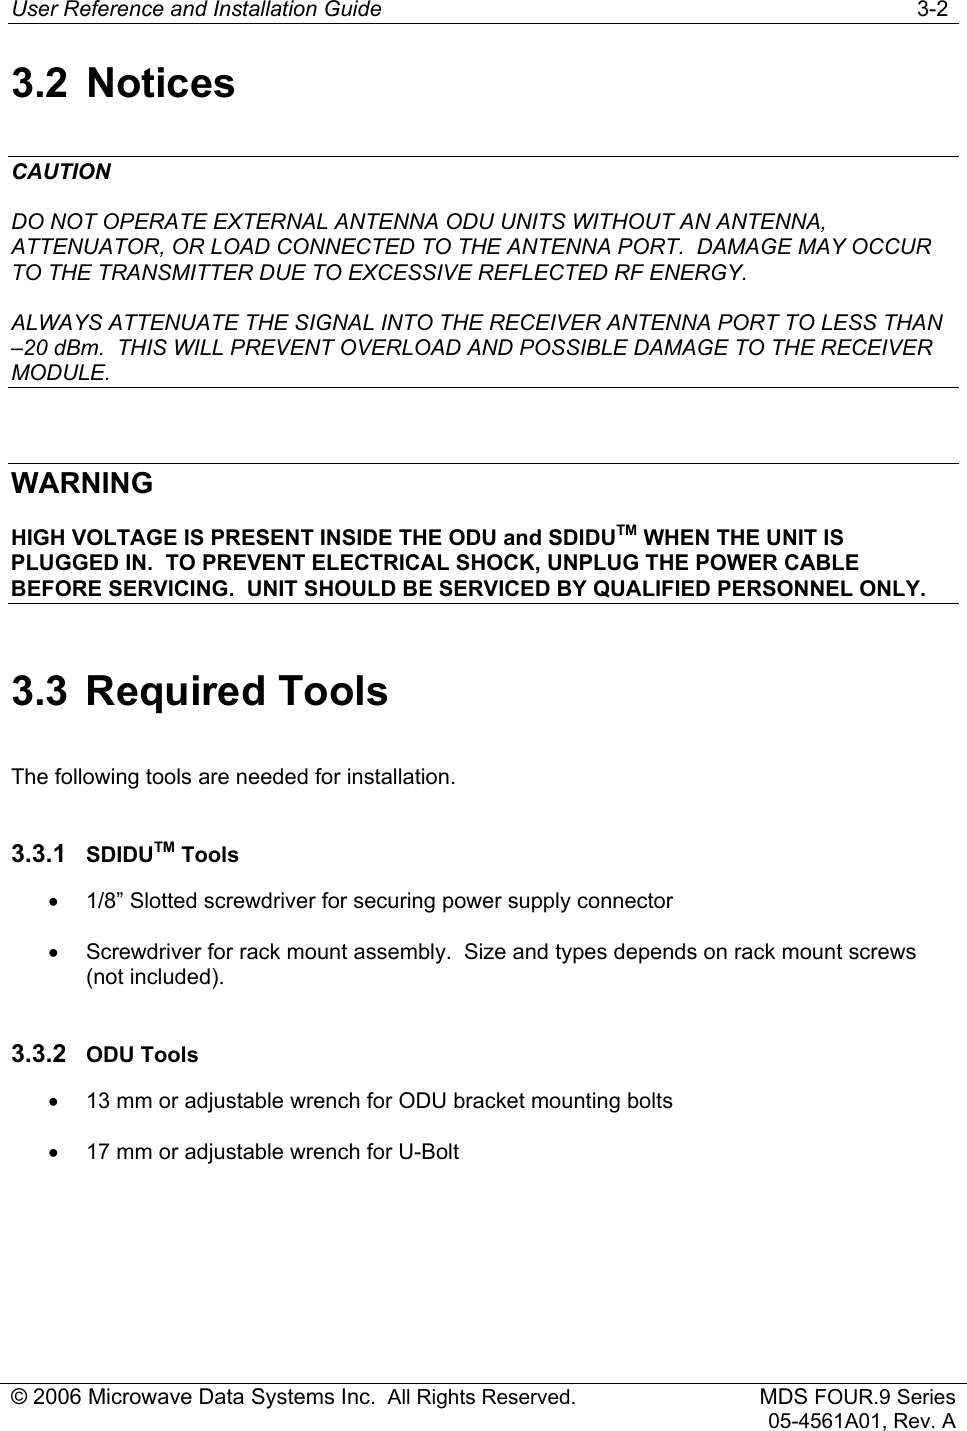 User Reference and Installation Guide   3-2 © 2006 Microwave Data Systems Inc.  All Rights Reserved. MDS FOUR.9 Series 05-4561A01, Rev. A 3.2 Notices CAUTION DO NOT OPERATE EXTERNAL ANTENNA ODU UNITS WITHOUT AN ANTENNA, ATTENUATOR, OR LOAD CONNECTED TO THE ANTENNA PORT.  DAMAGE MAY OCCUR TO THE TRANSMITTER DUE TO EXCESSIVE REFLECTED RF ENERGY. ALWAYS ATTENUATE THE SIGNAL INTO THE RECEIVER ANTENNA PORT TO LESS THAN –20 dBm.  THIS WILL PREVENT OVERLOAD AND POSSIBLE DAMAGE TO THE RECEIVER MODULE.  WARNING HIGH VOLTAGE IS PRESENT INSIDE THE ODU and SDIDUTM WHEN THE UNIT IS PLUGGED IN.  TO PREVENT ELECTRICAL SHOCK, UNPLUG THE POWER CABLE BEFORE SERVICING.  UNIT SHOULD BE SERVICED BY QUALIFIED PERSONNEL ONLY. 3.3 Required Tools The following tools are needed for installation. 3.3.1  SDIDUTM Tools •  1/8” Slotted screwdriver for securing power supply connector •  Screwdriver for rack mount assembly.  Size and types depends on rack mount screws (not included). 3.3.2  ODU Tools •  13 mm or adjustable wrench for ODU bracket mounting bolts •  17 mm or adjustable wrench for U-Bolt 